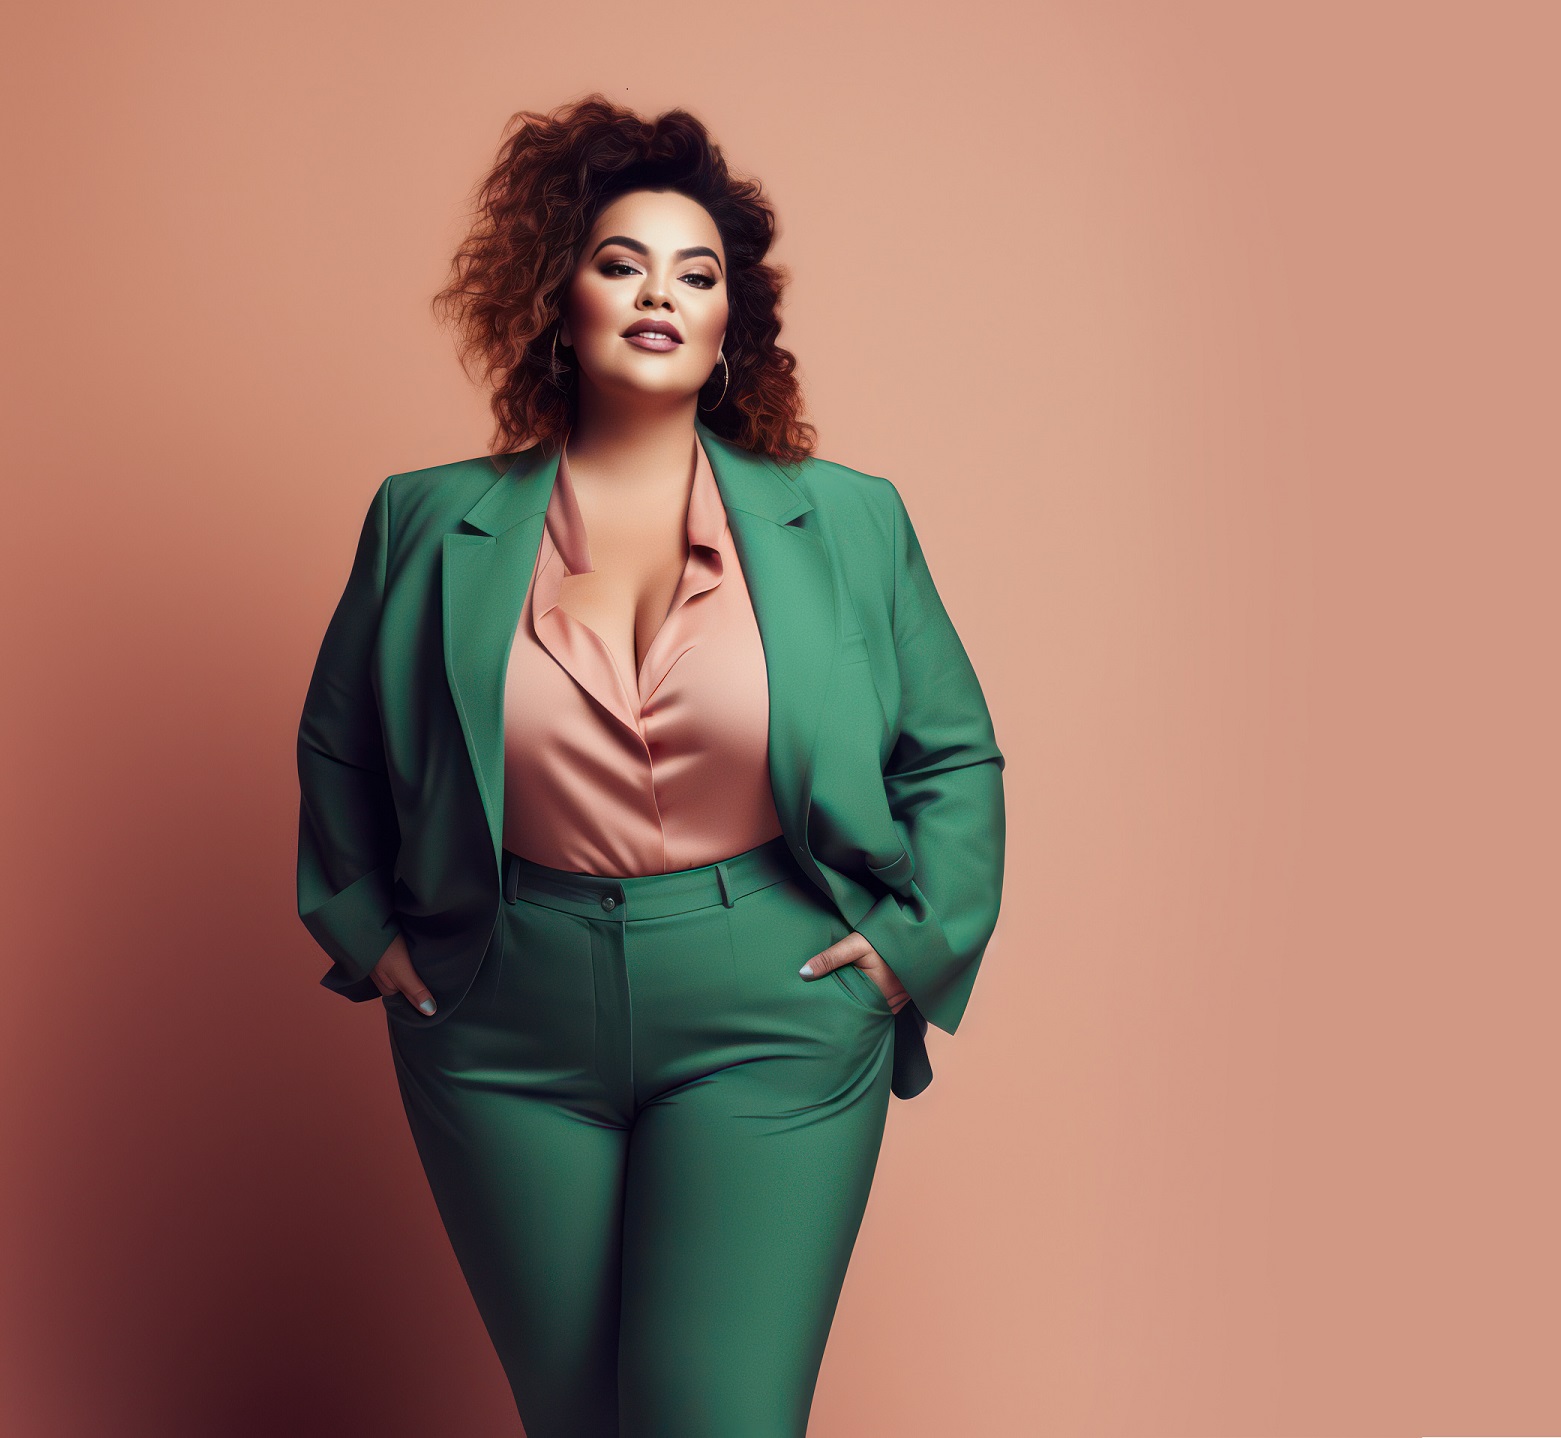 Plus-Size Business Casual Ideas for the Fall - 21Ninety